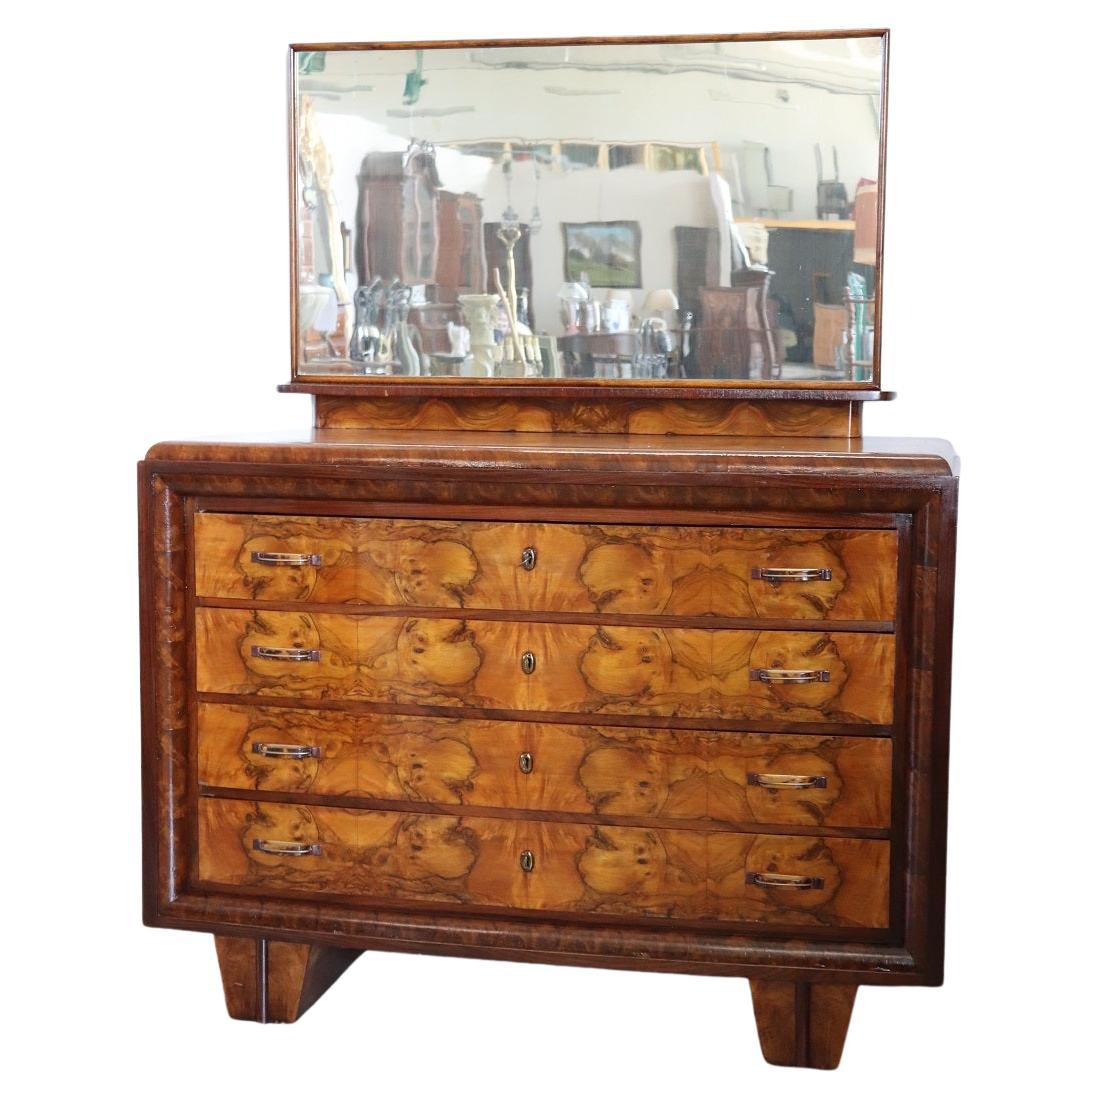 Italian Art Deco Chest of Drawers with Mirror, Restored